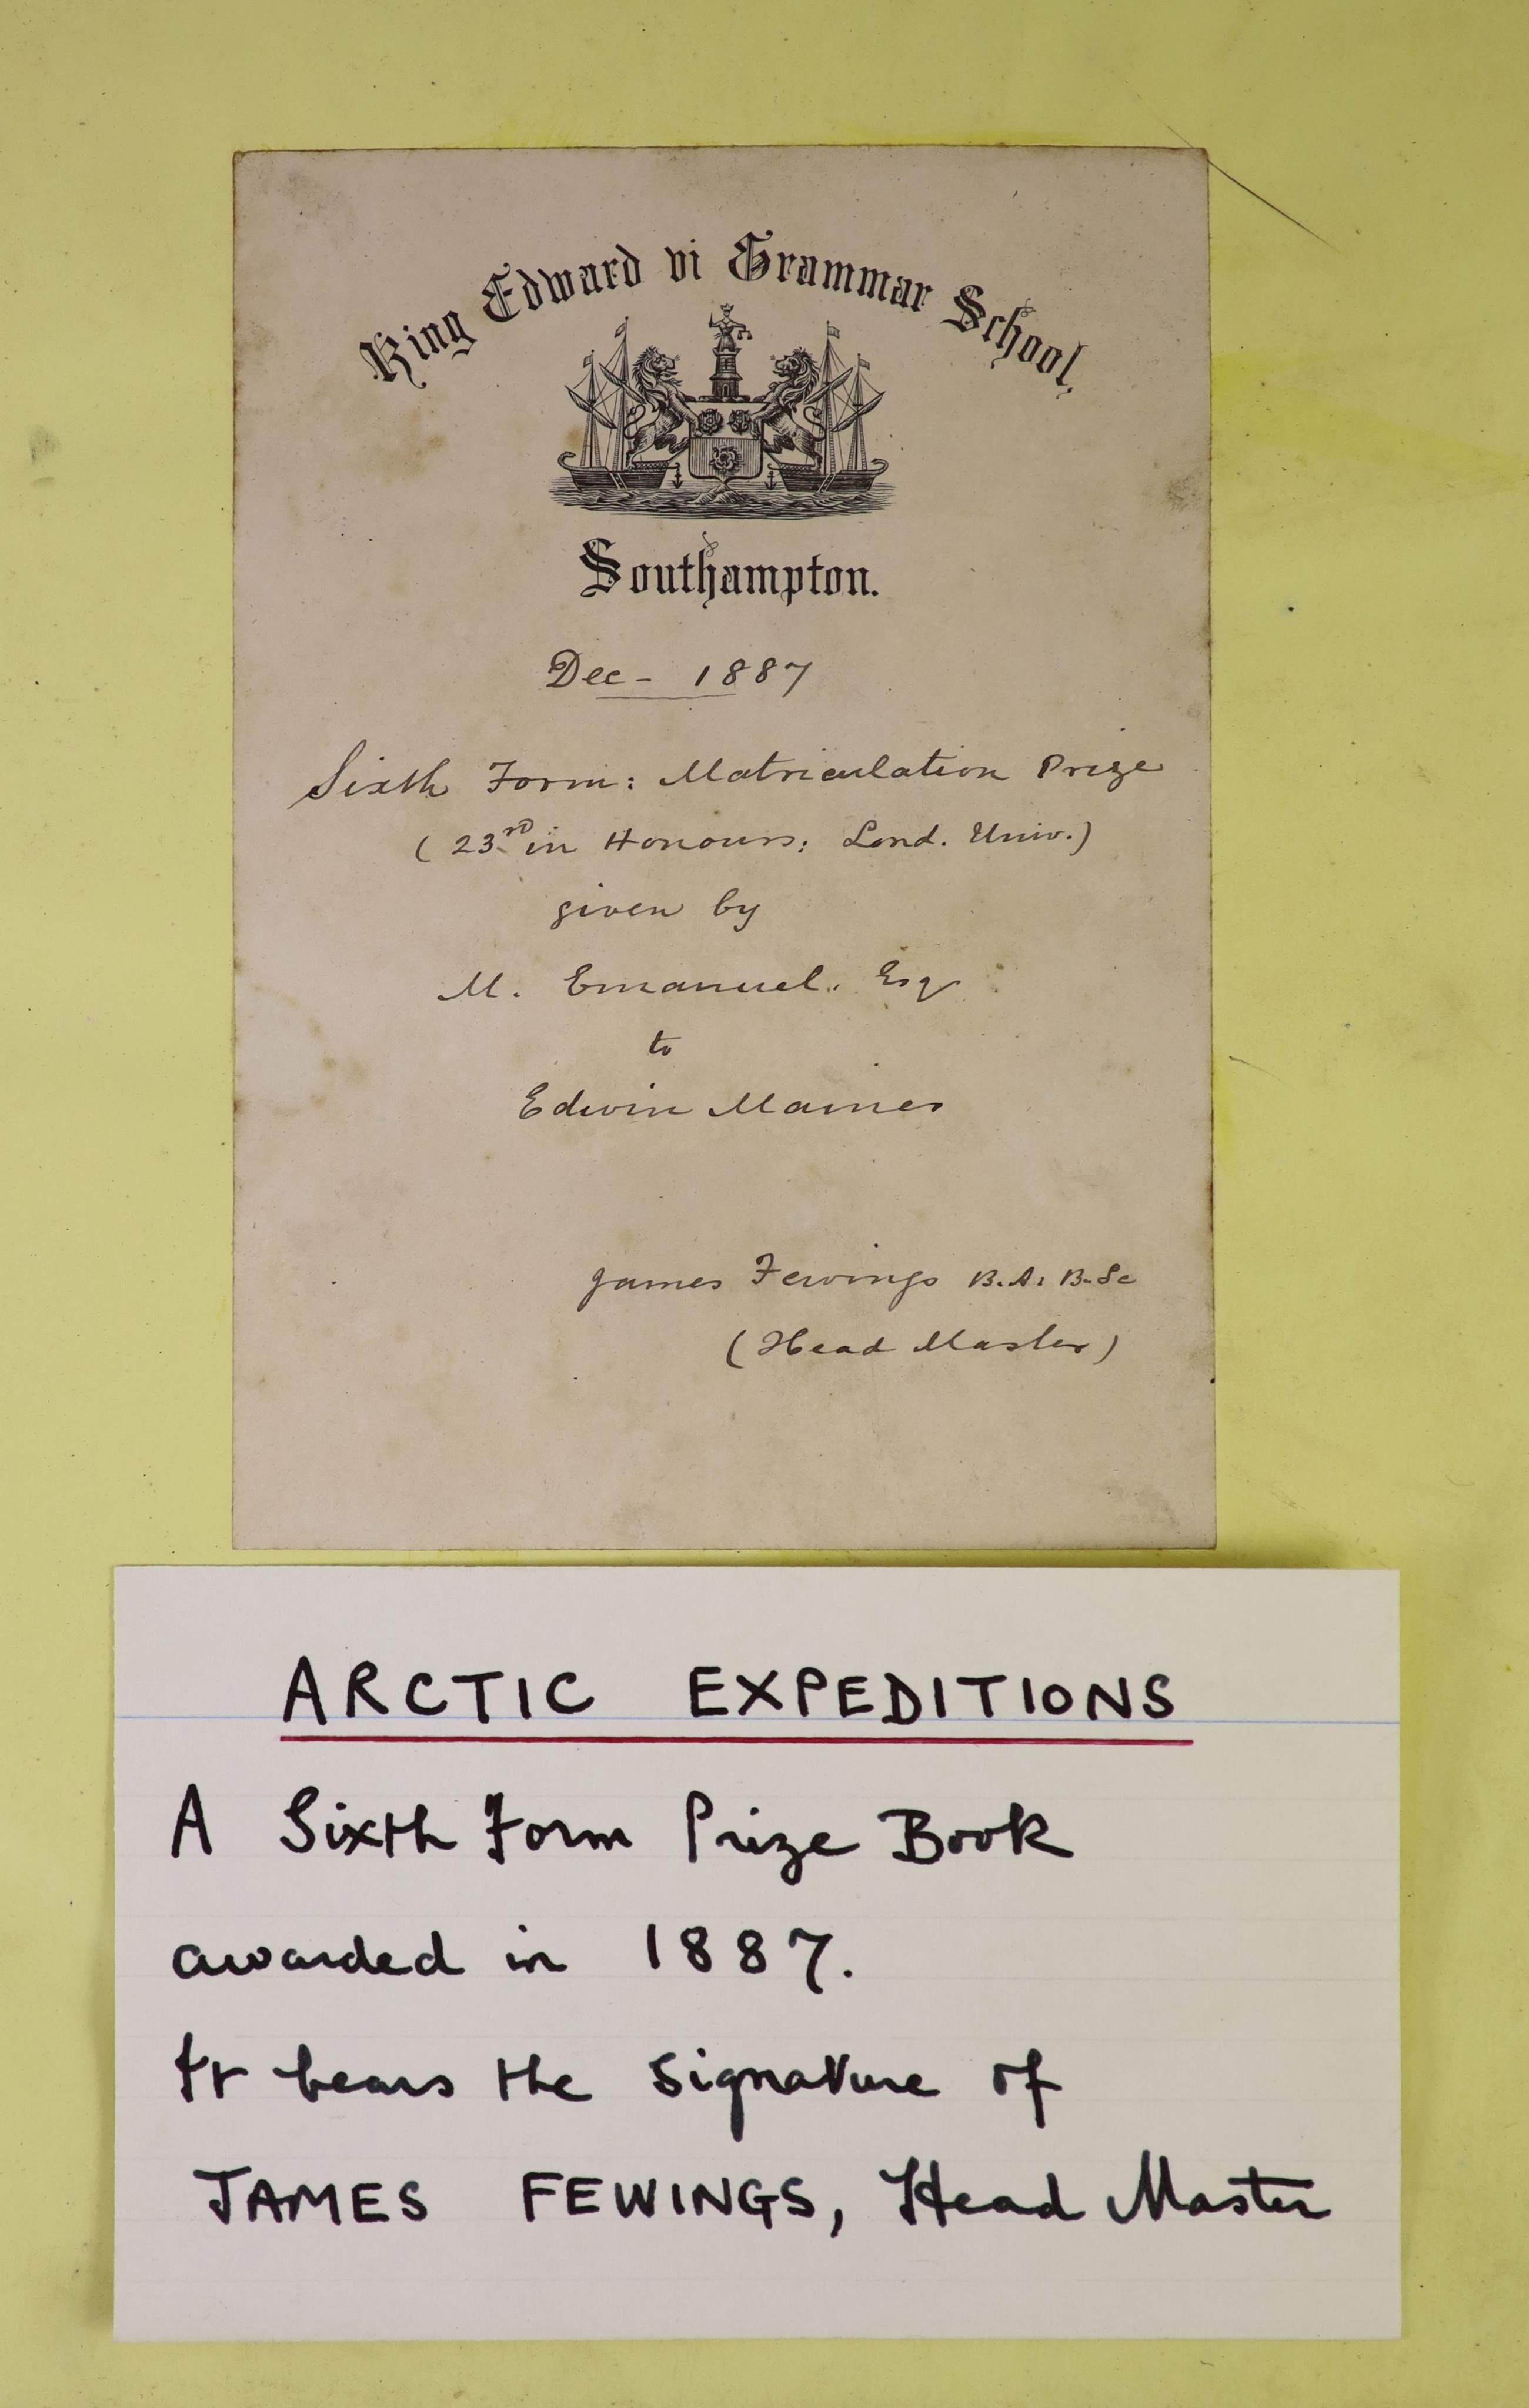 Smith, David Murray - Arctic Expeditions from British and Foreign Shores, 4to, original pictorial gilt morocco, brass bordered, with litho frontis, 25 plates (2 in colour) and 2 folding tinted, the front one of which has